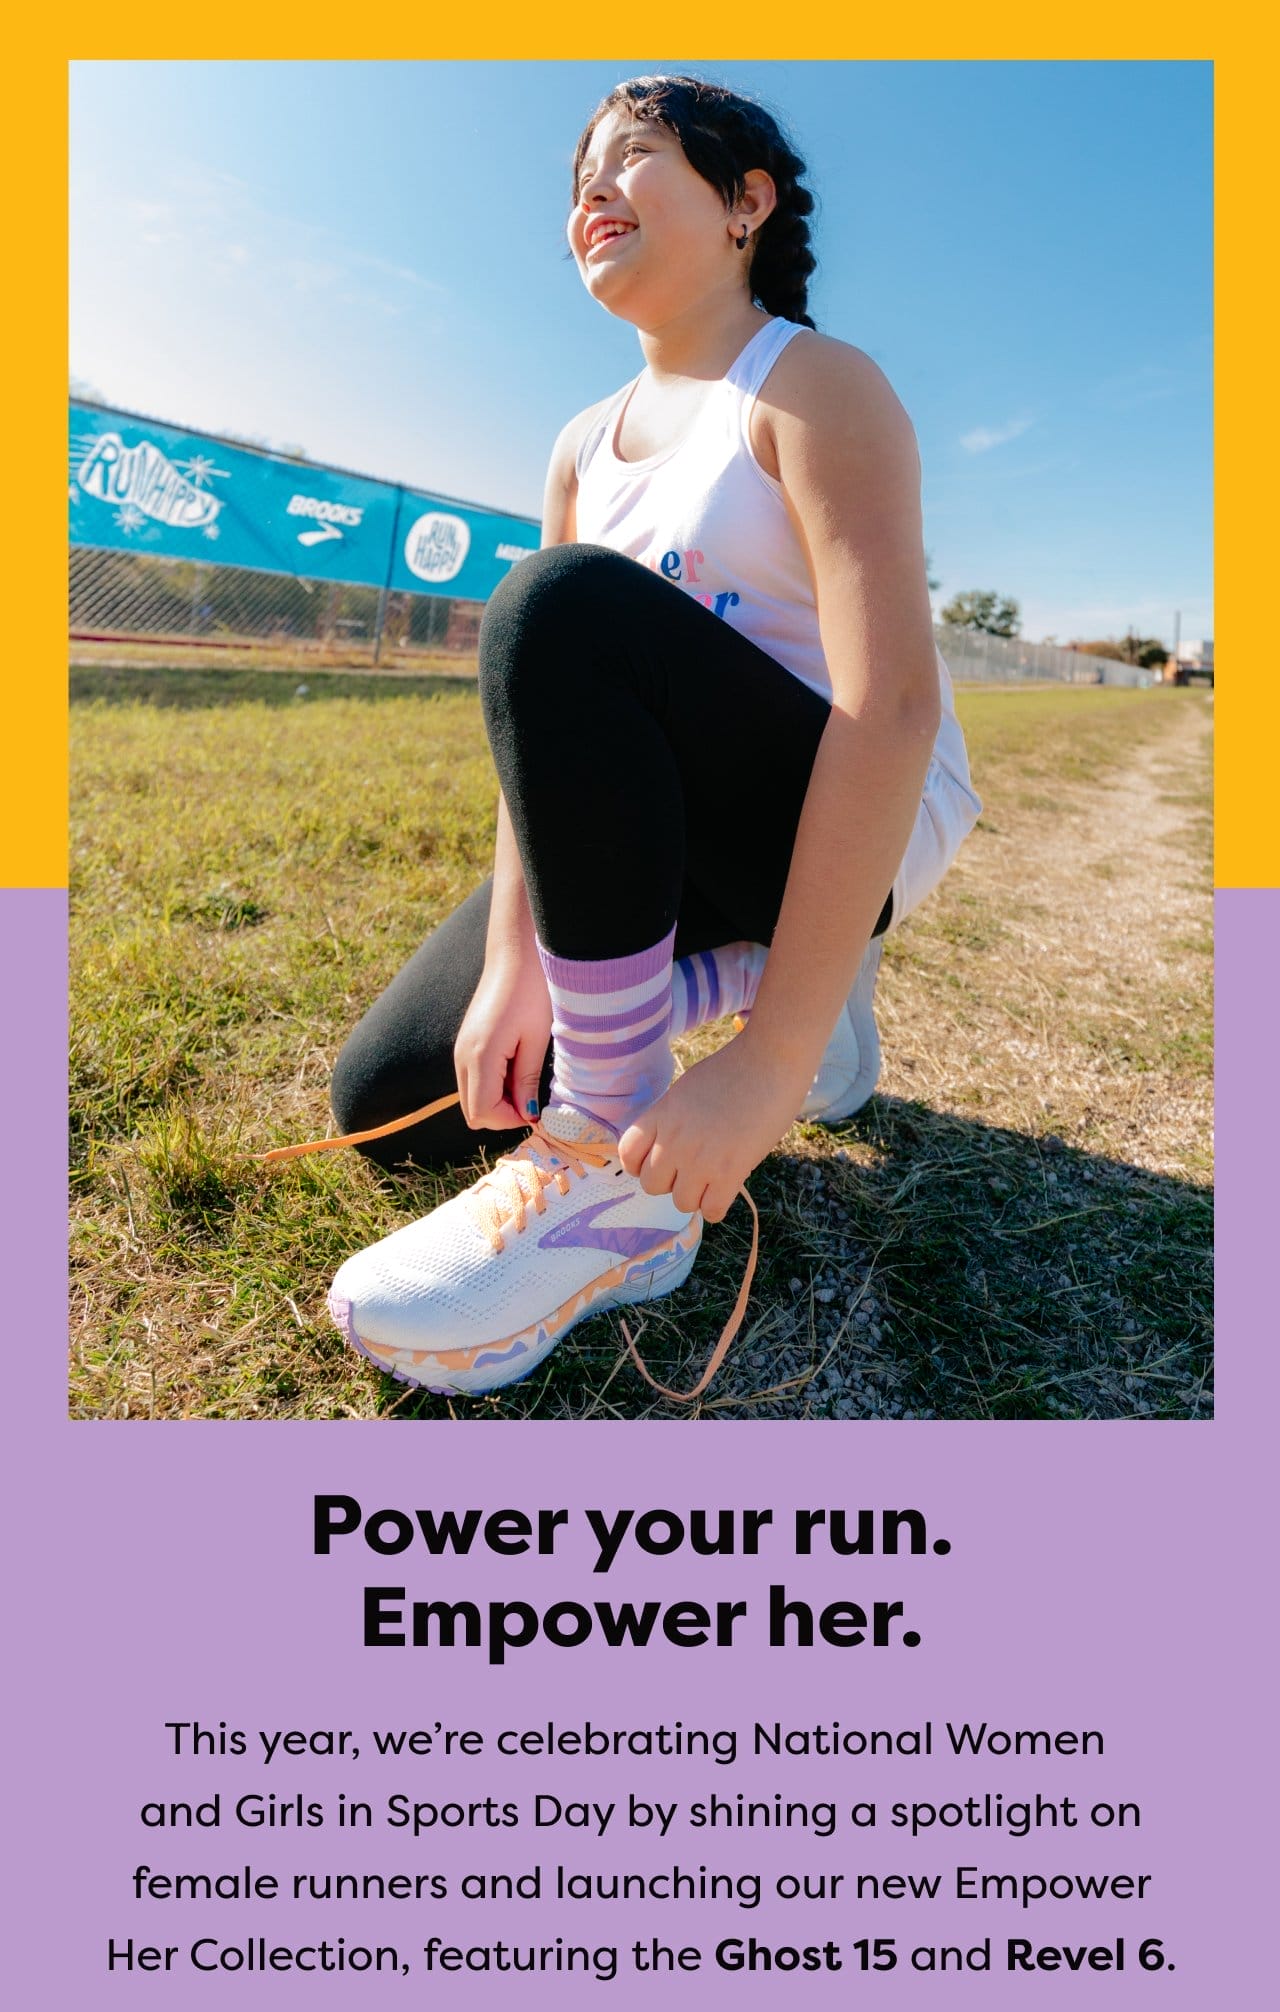 Power your run. Empower her. This year, we're celebrating National Women and Girls in Sports Day by shining a spotlight on female runners and launching our new Empower Her Collection, featuring the Ghost 15 and Revel 6.